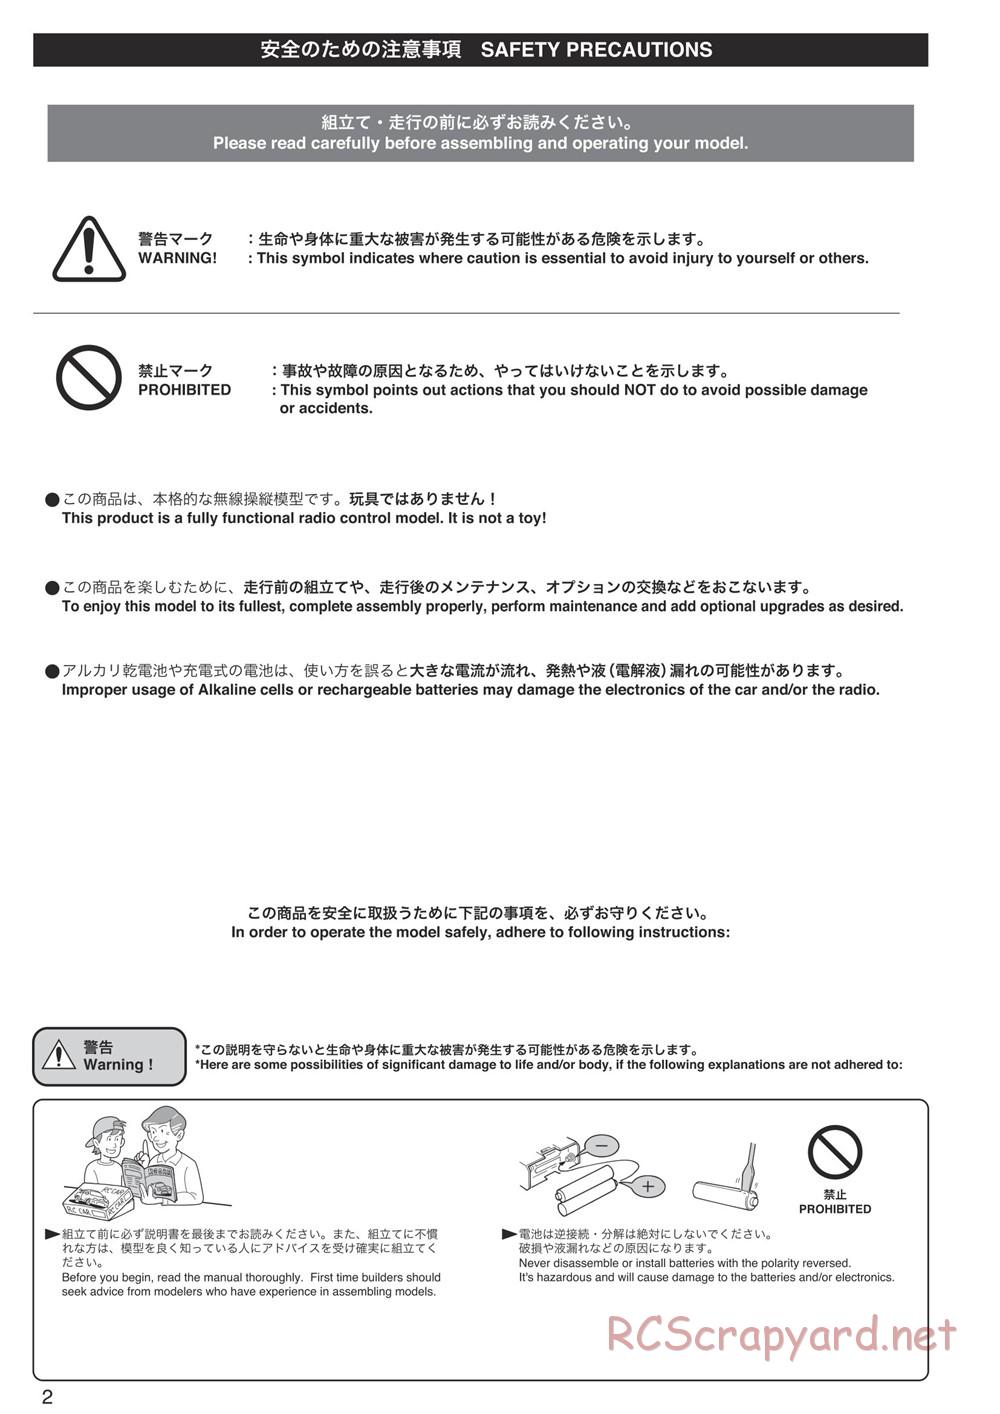 Kyosho - Inferno MP9 TKI4 10th Anniversary Special Edition - Manual - Page 2